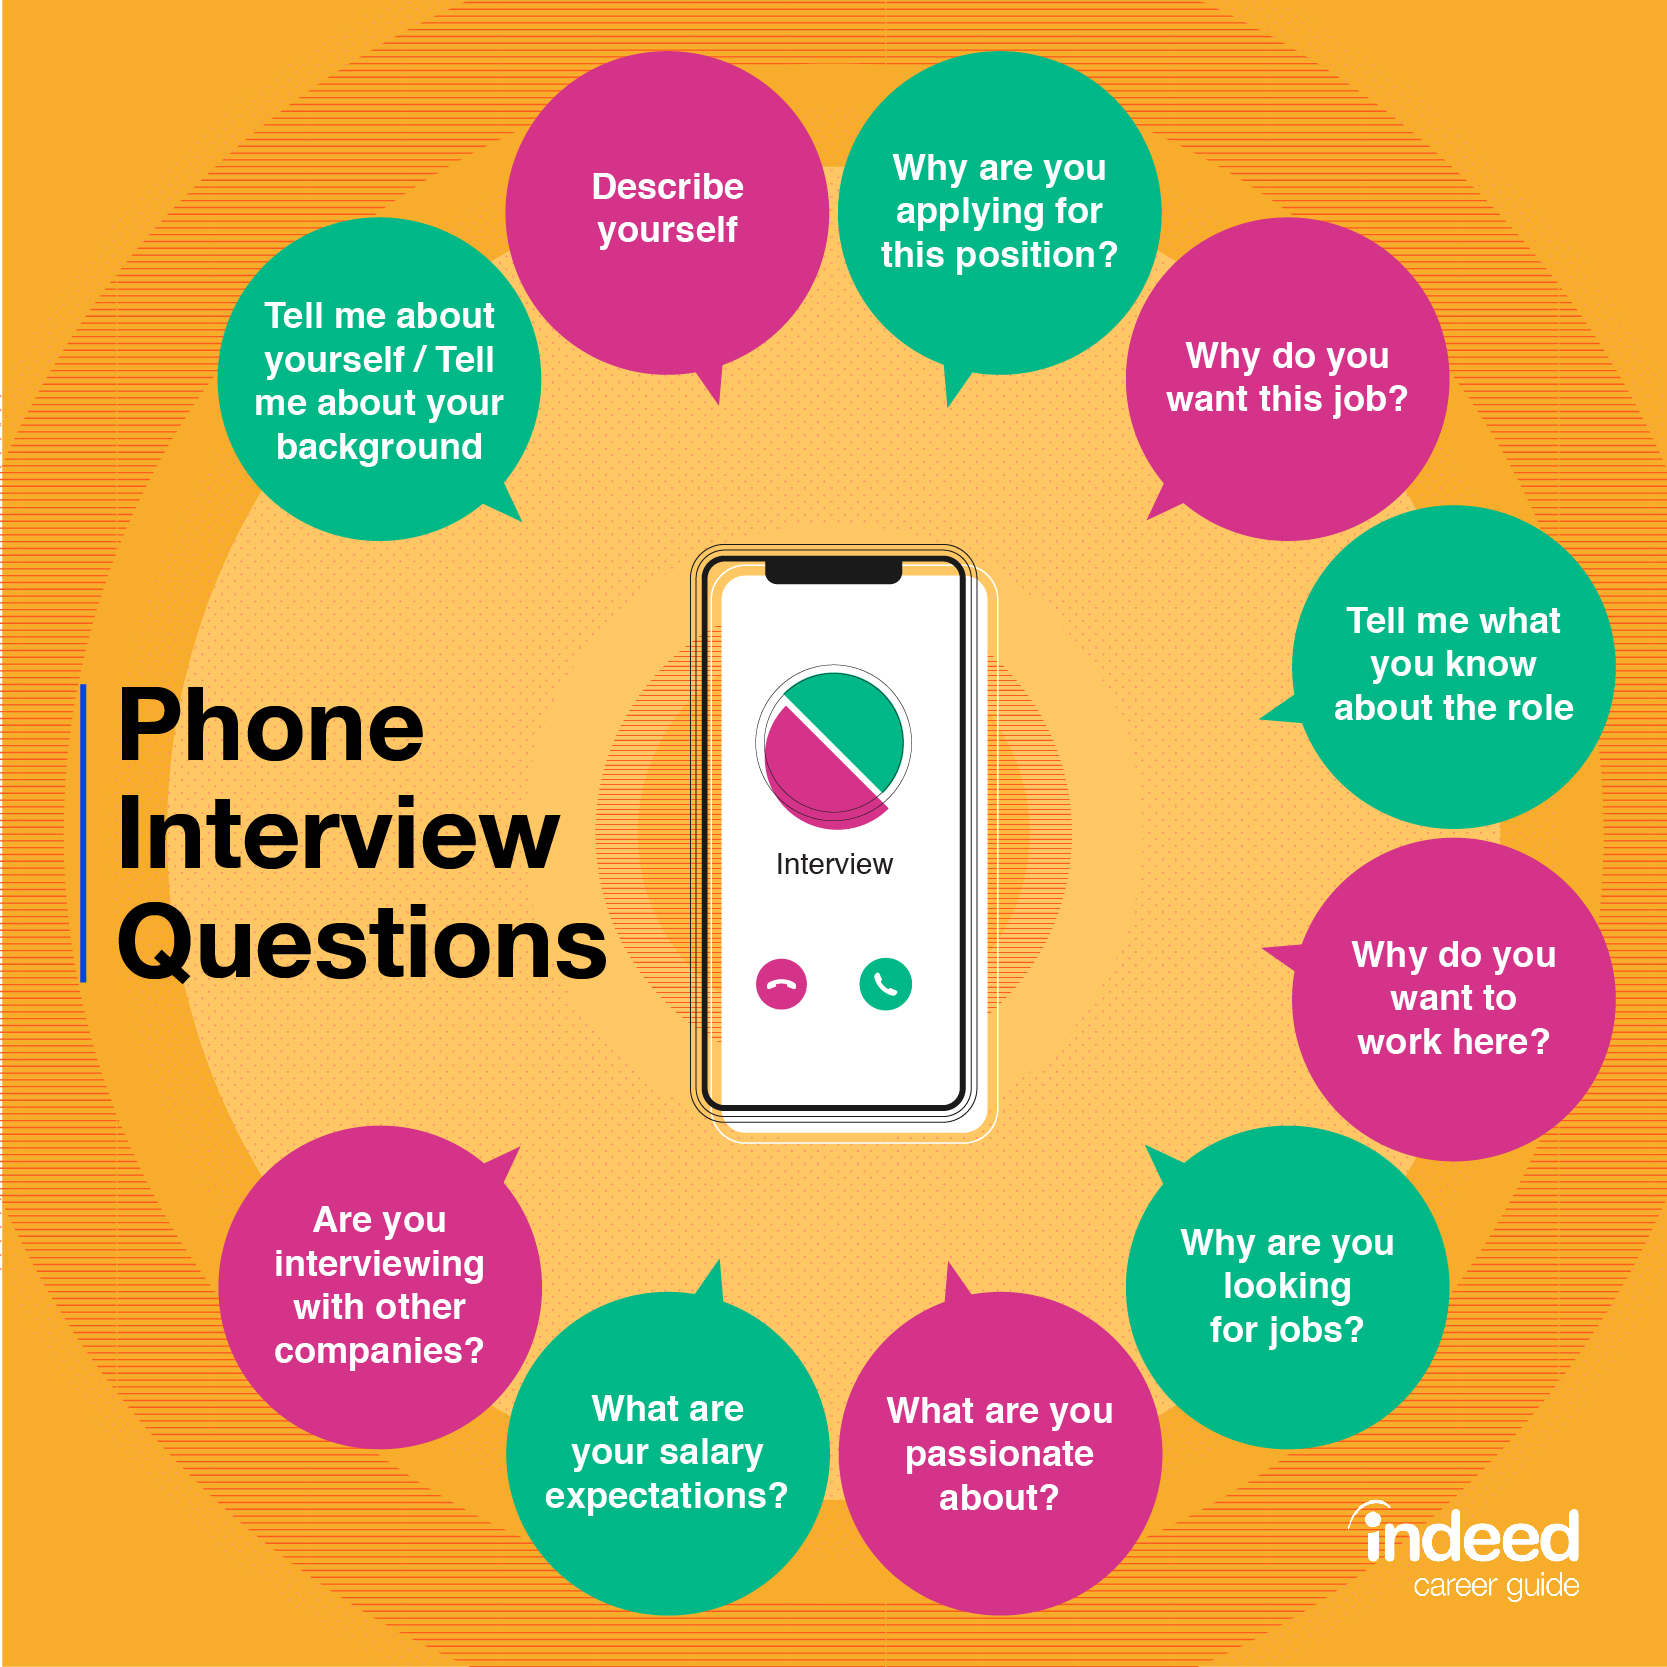 15 Common Phone Interview Questions (With Example Answers) 